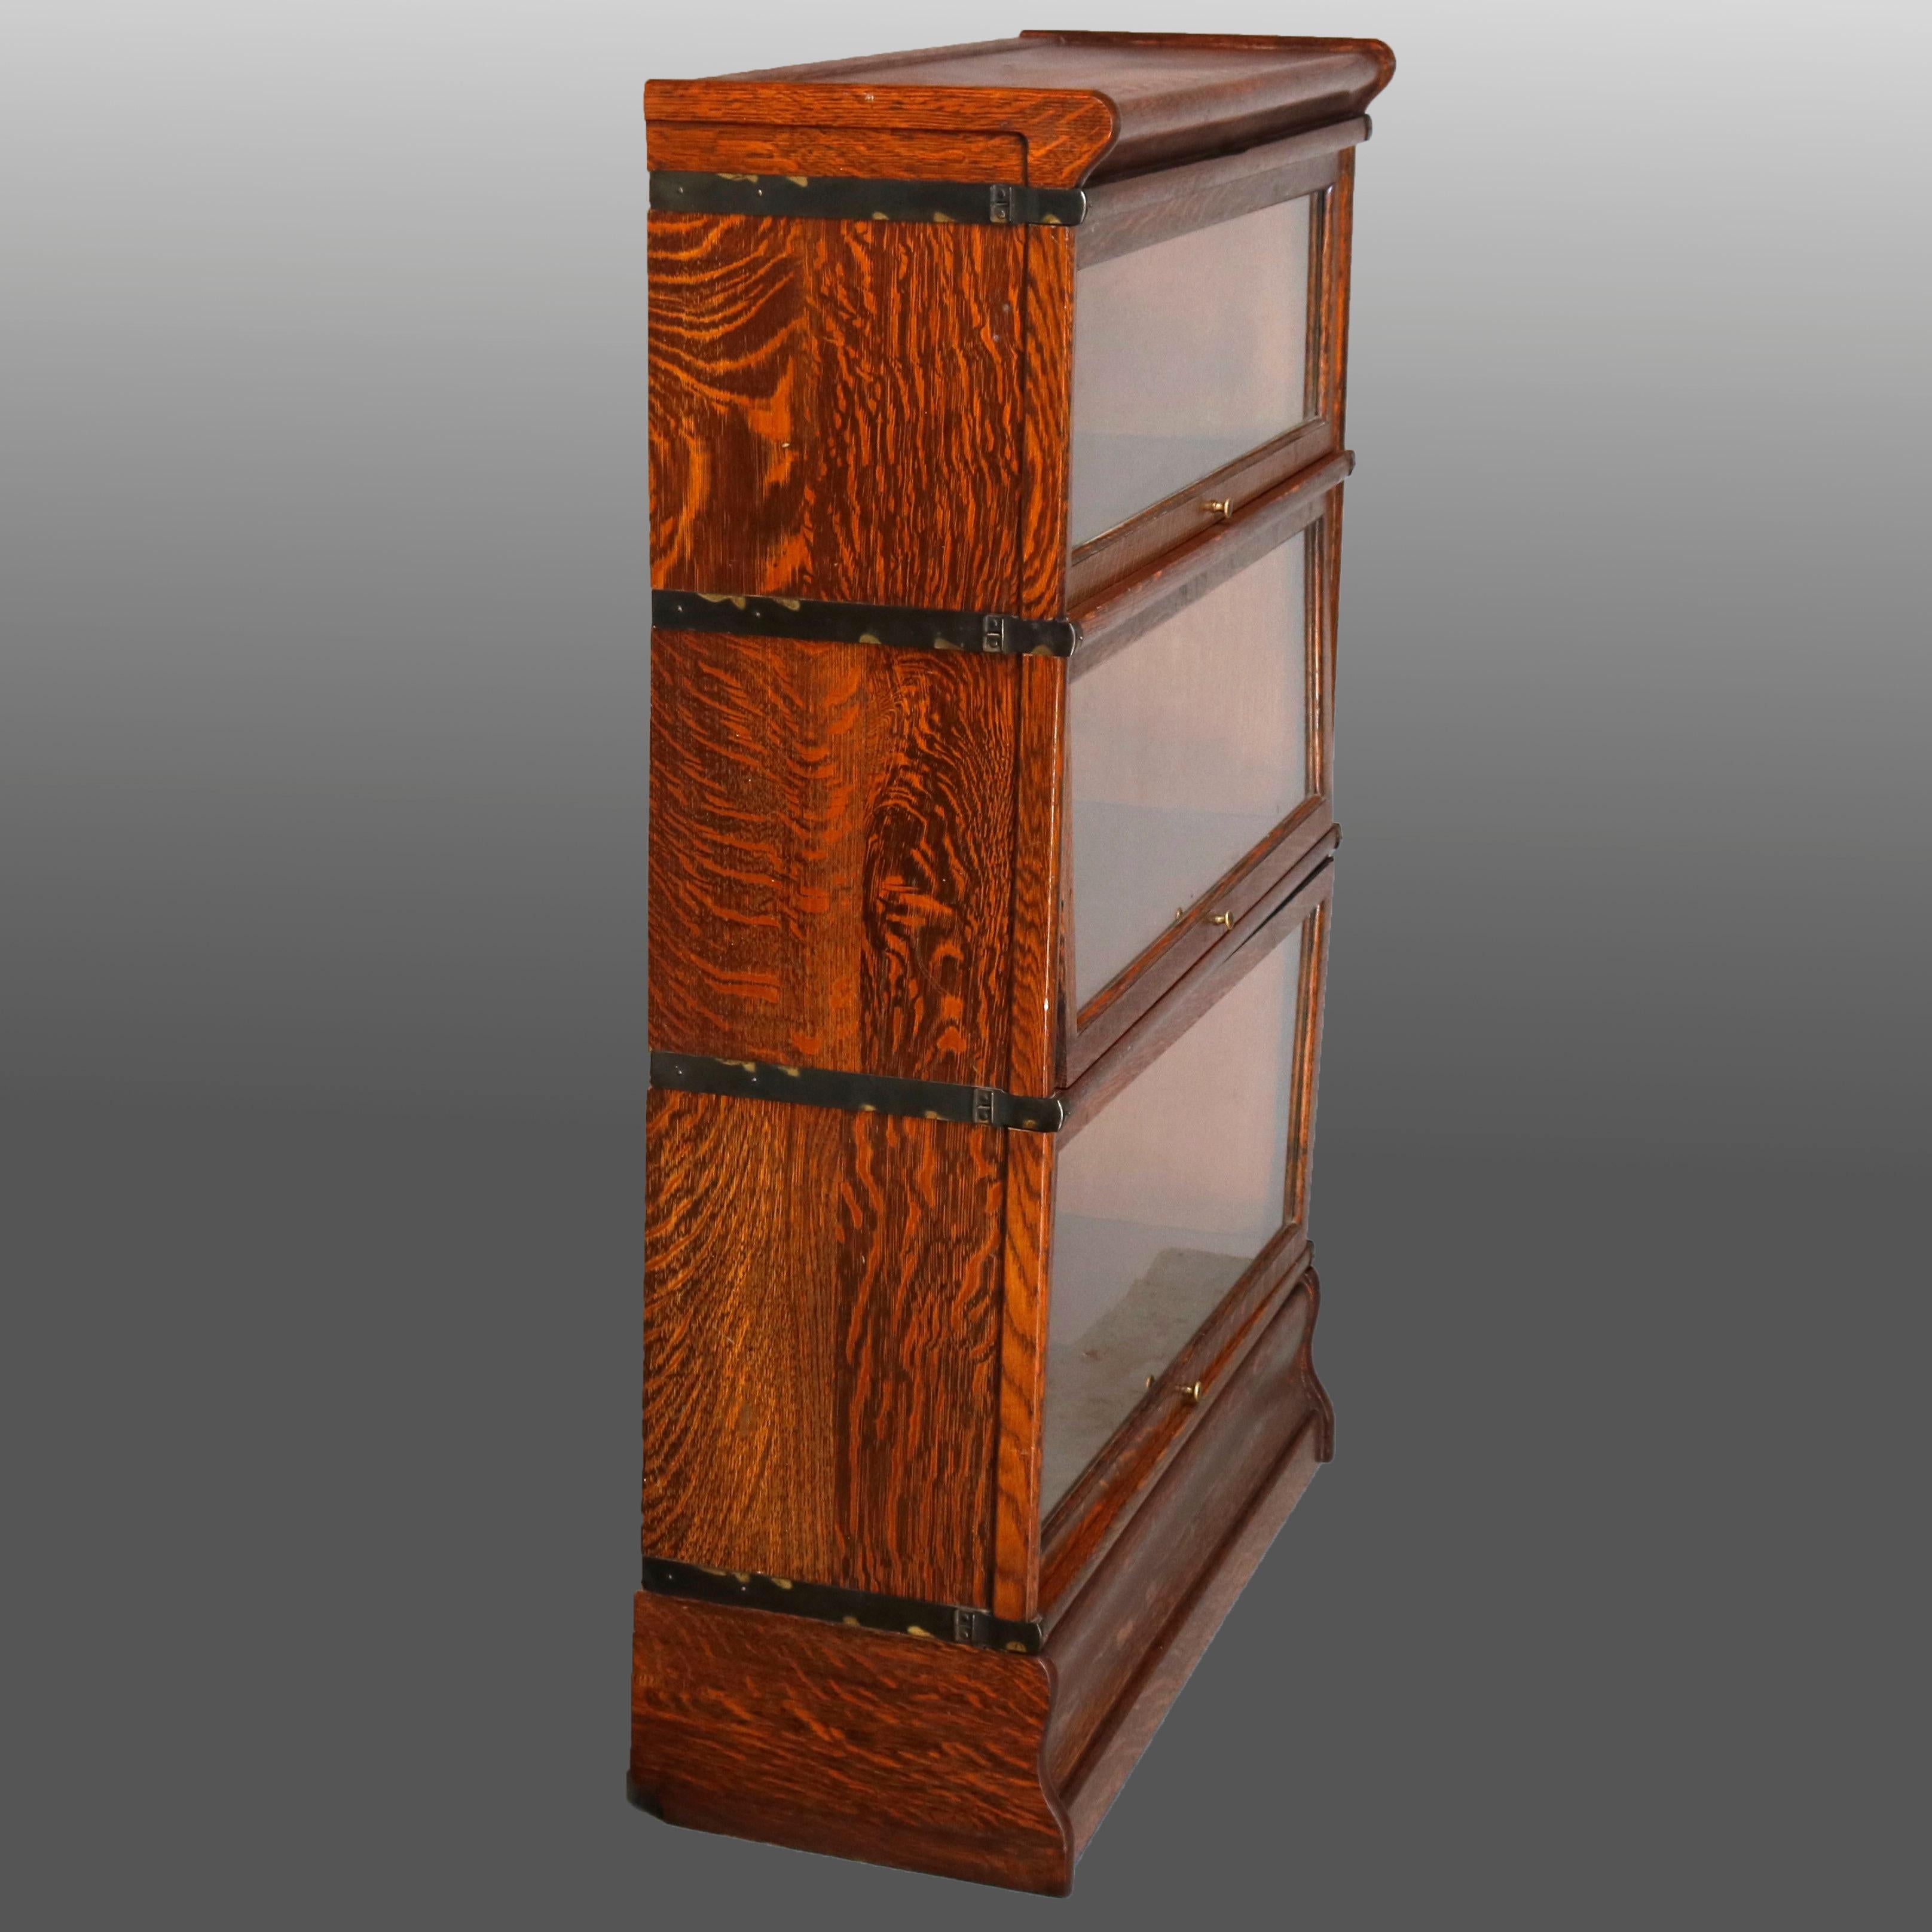 An Arts & Crafts Barrister three-stack bookcase by Globe Wernicke offers quarter sawn oak construction with pullout / pull-out glass doors, original labels as photographed, circa 1910.

Measures: 47.25